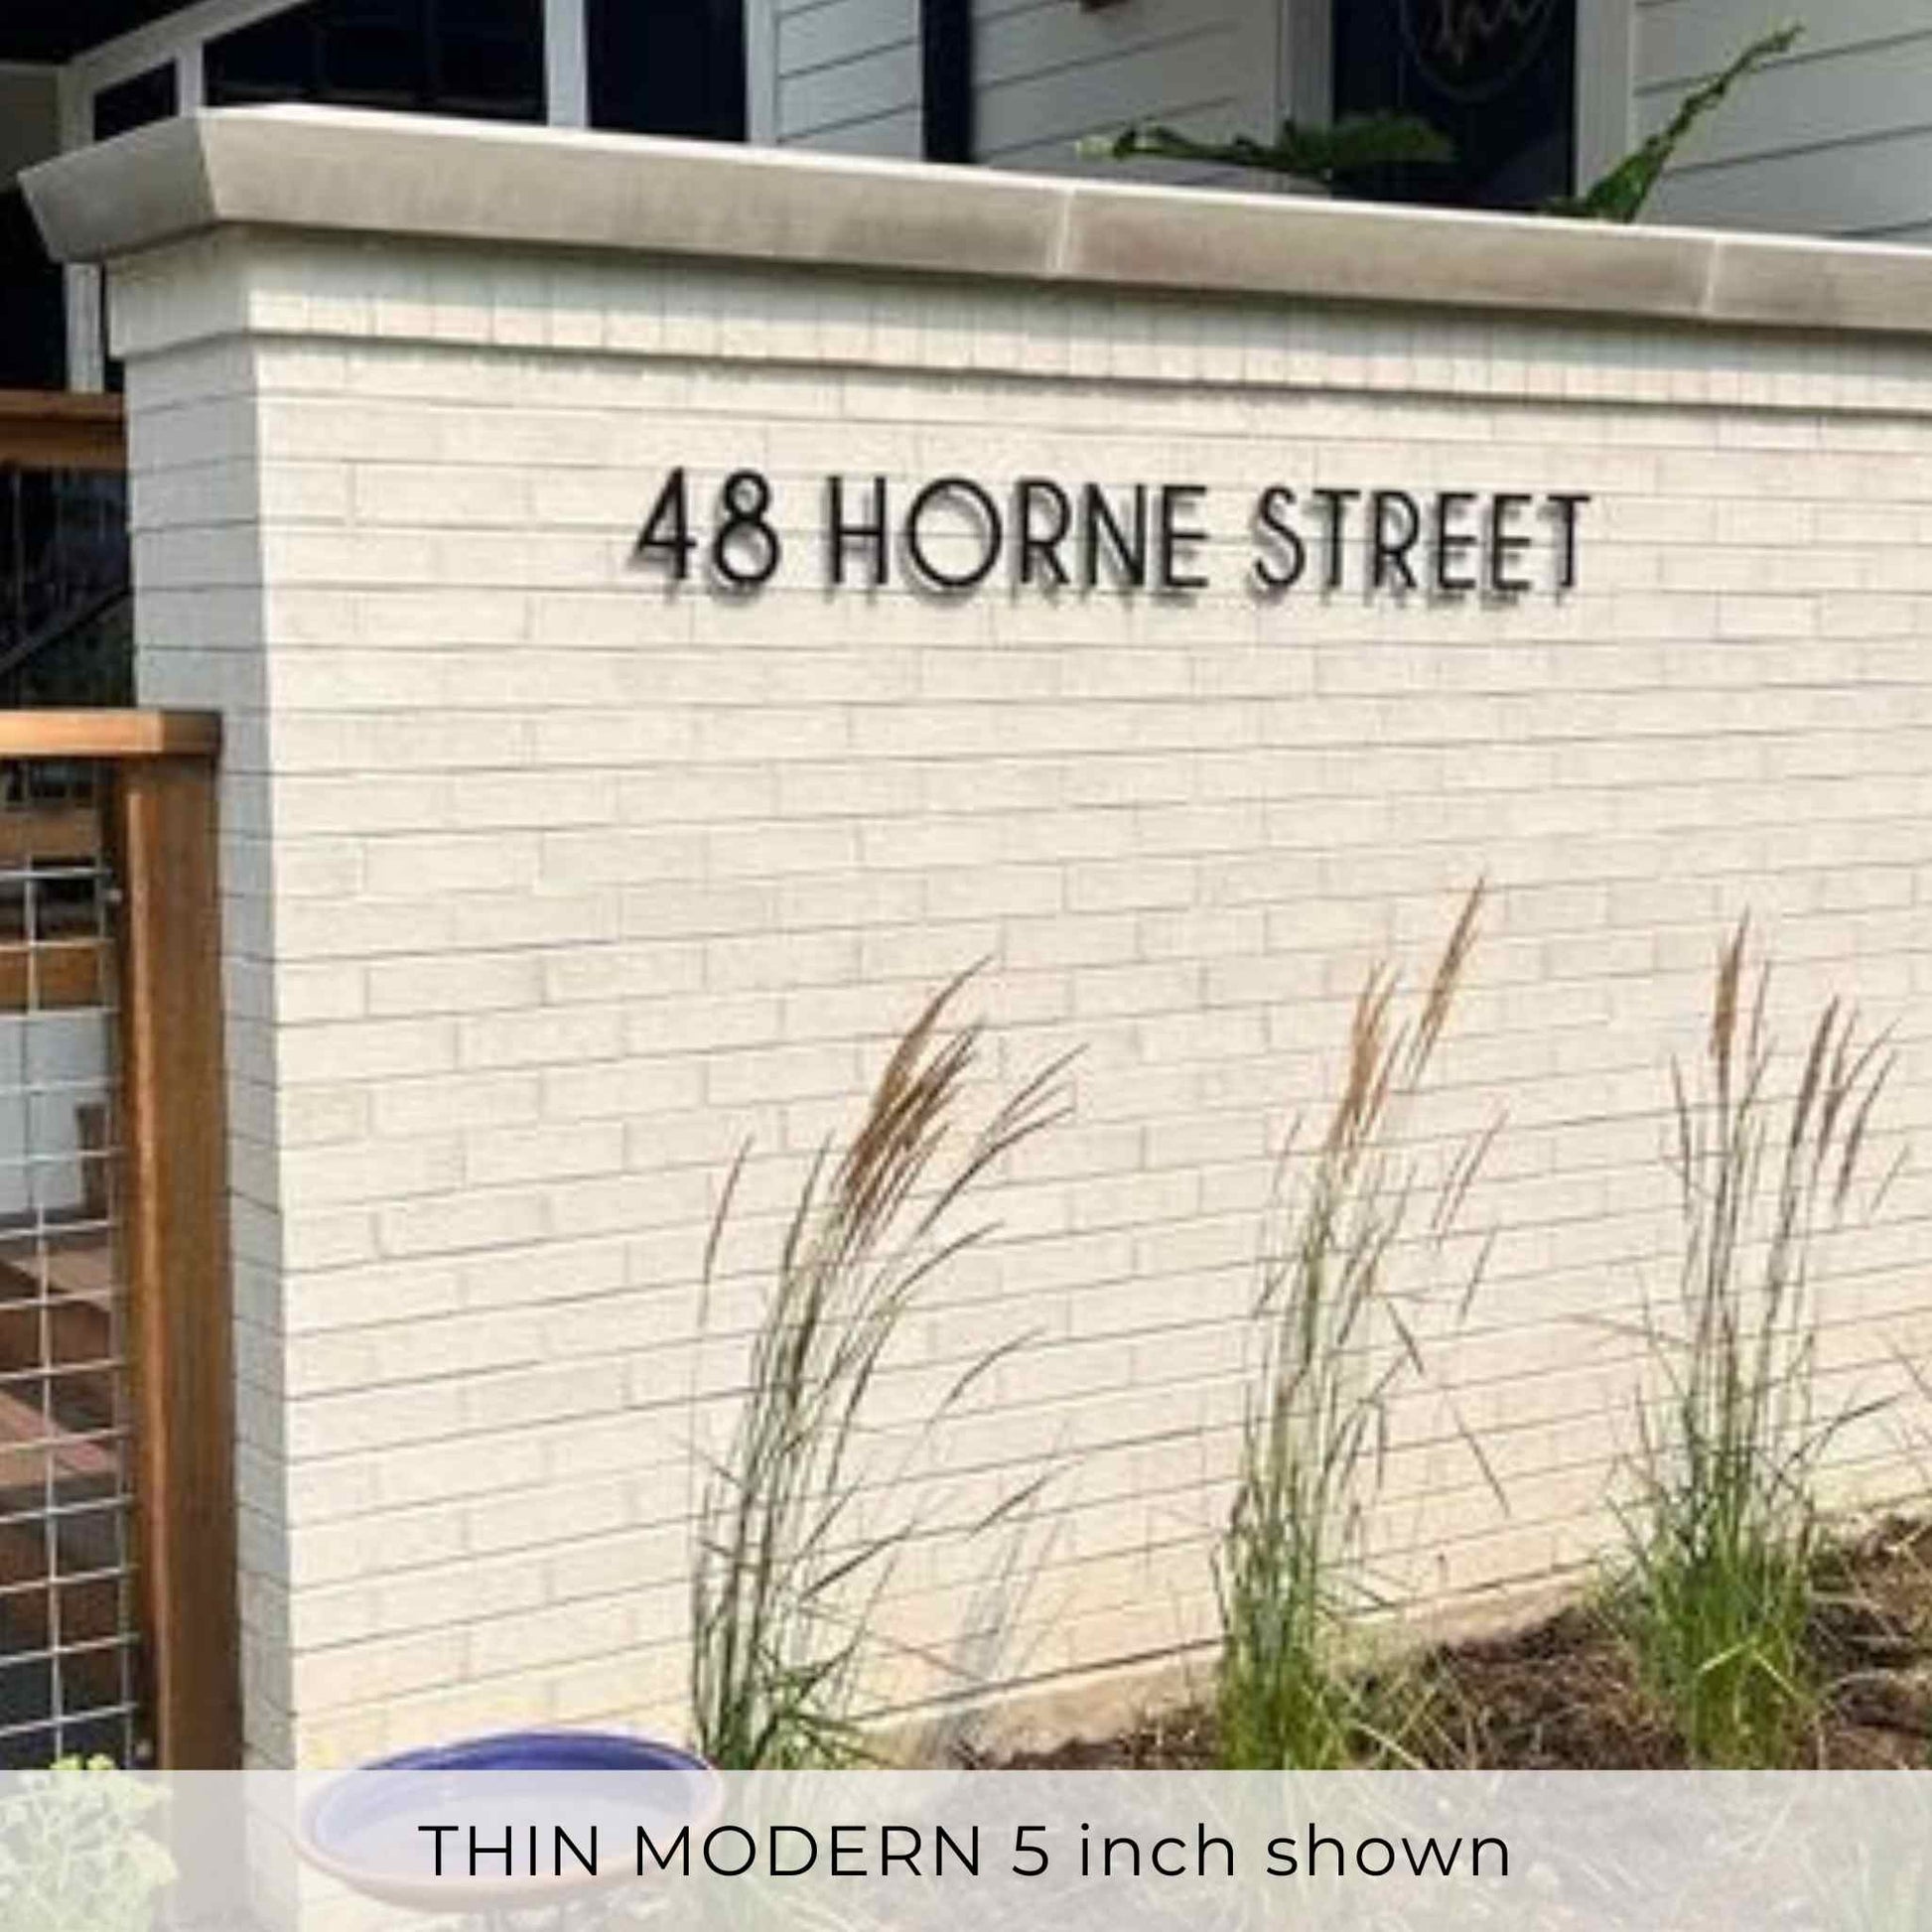 THIN MODERN house numbers and letters to spell a street name for an eye catching address sign